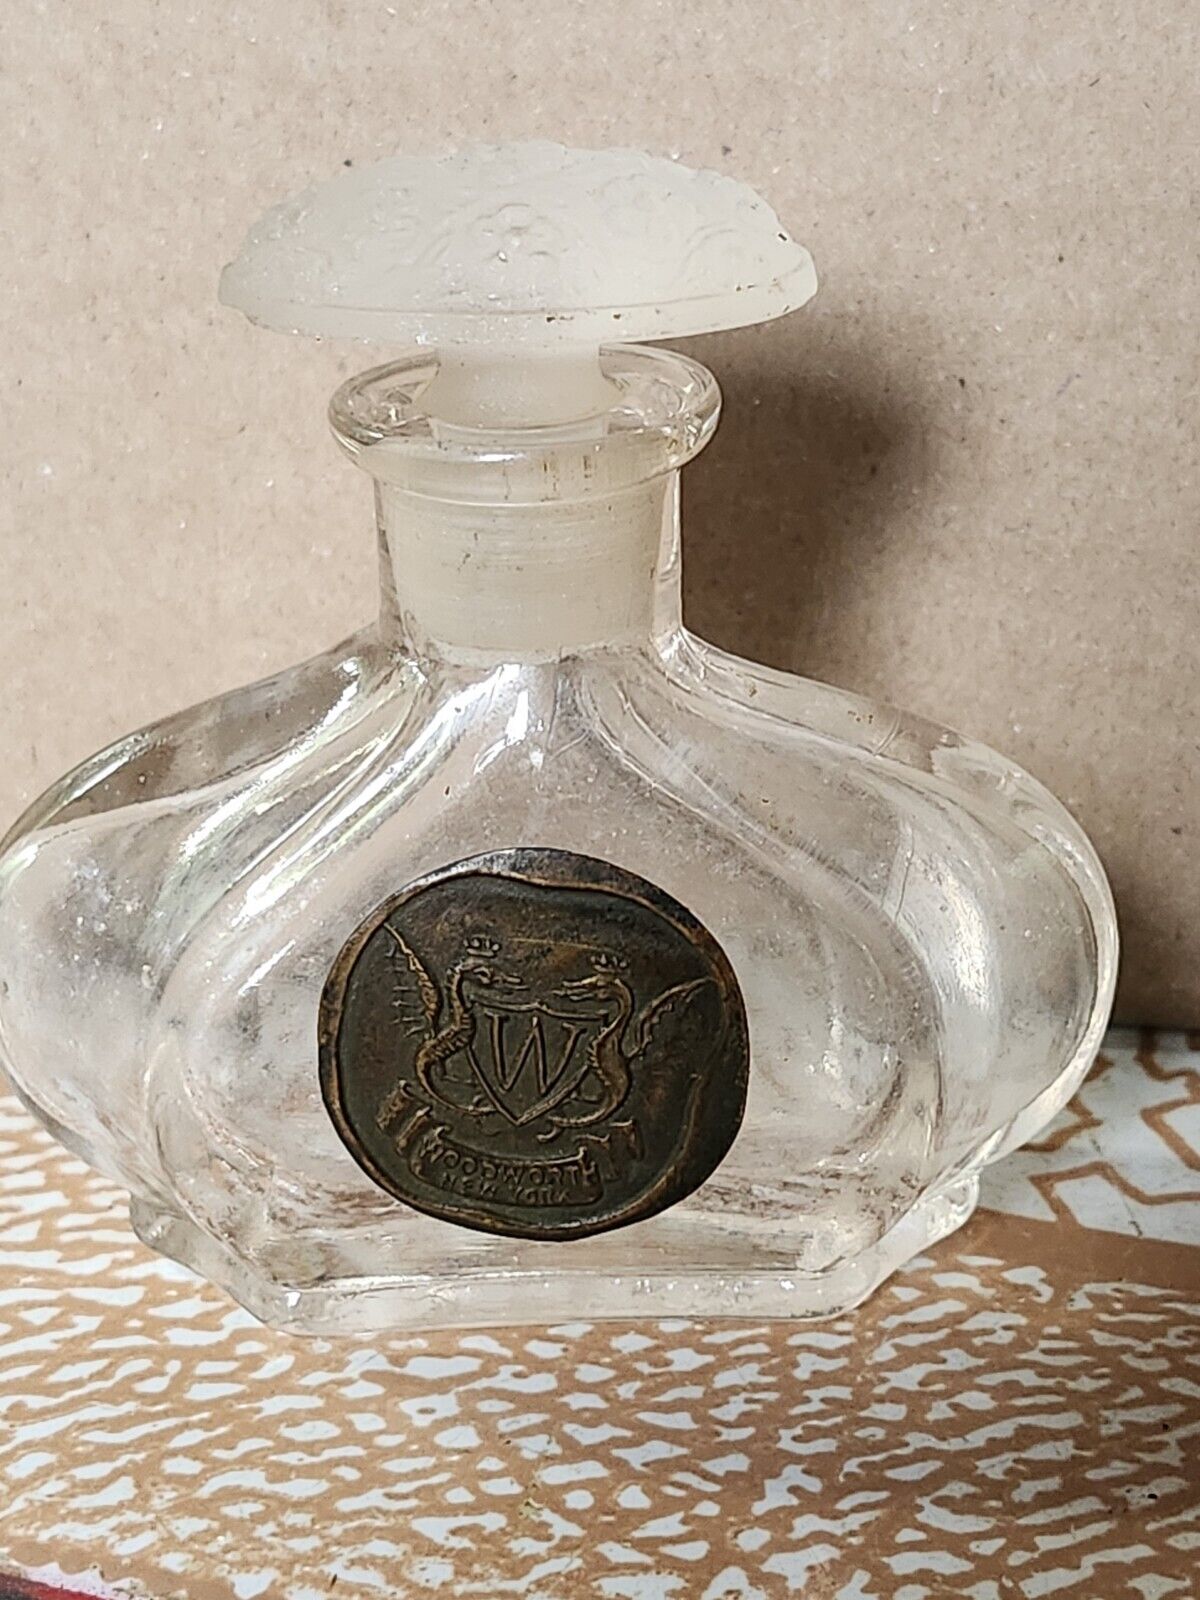 VTG Antique WOODWORTH NY Garden Fragrance Perfume Bottle Frosted Glass top rare